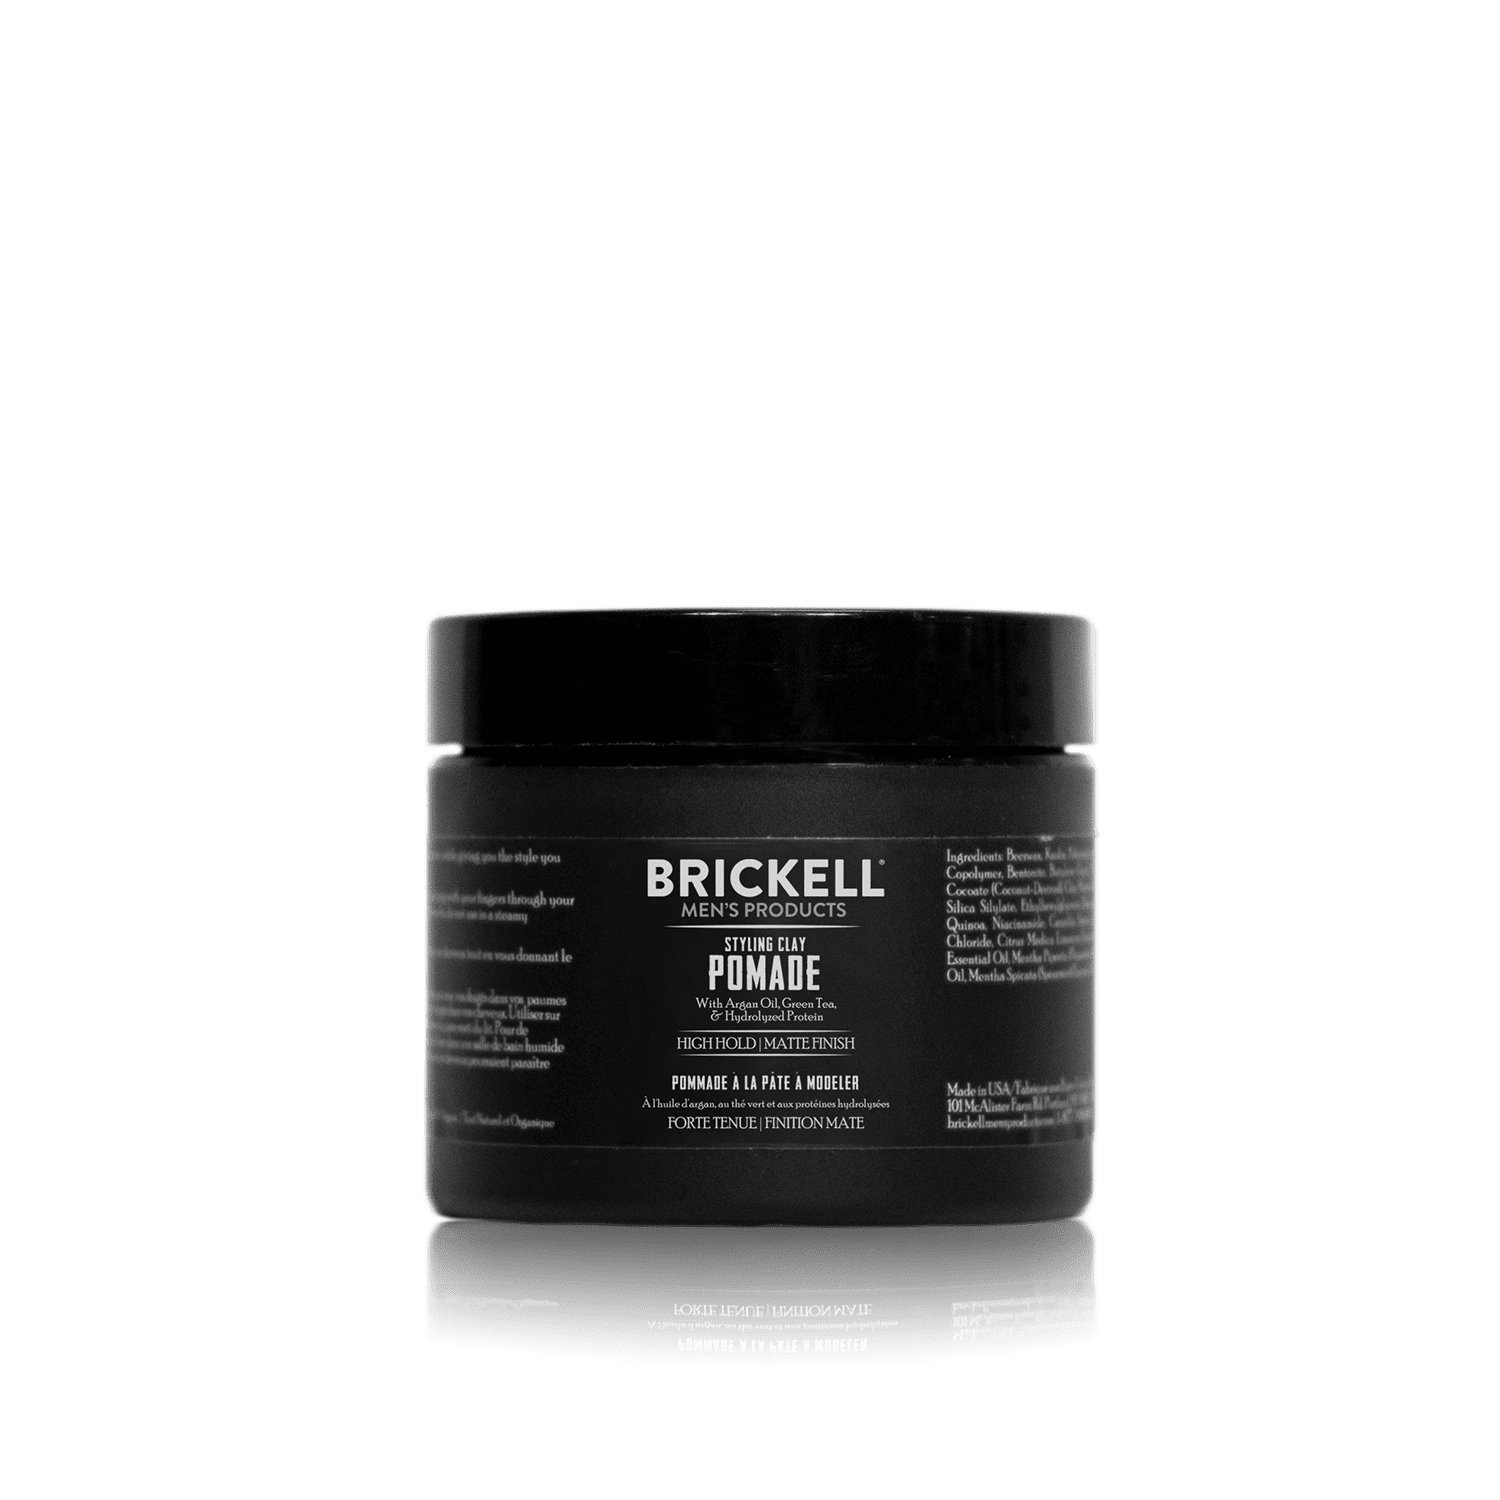 Brickell Men's Products Styling Clay Pomade For Men. 2 oz - Natural  Ingredients 